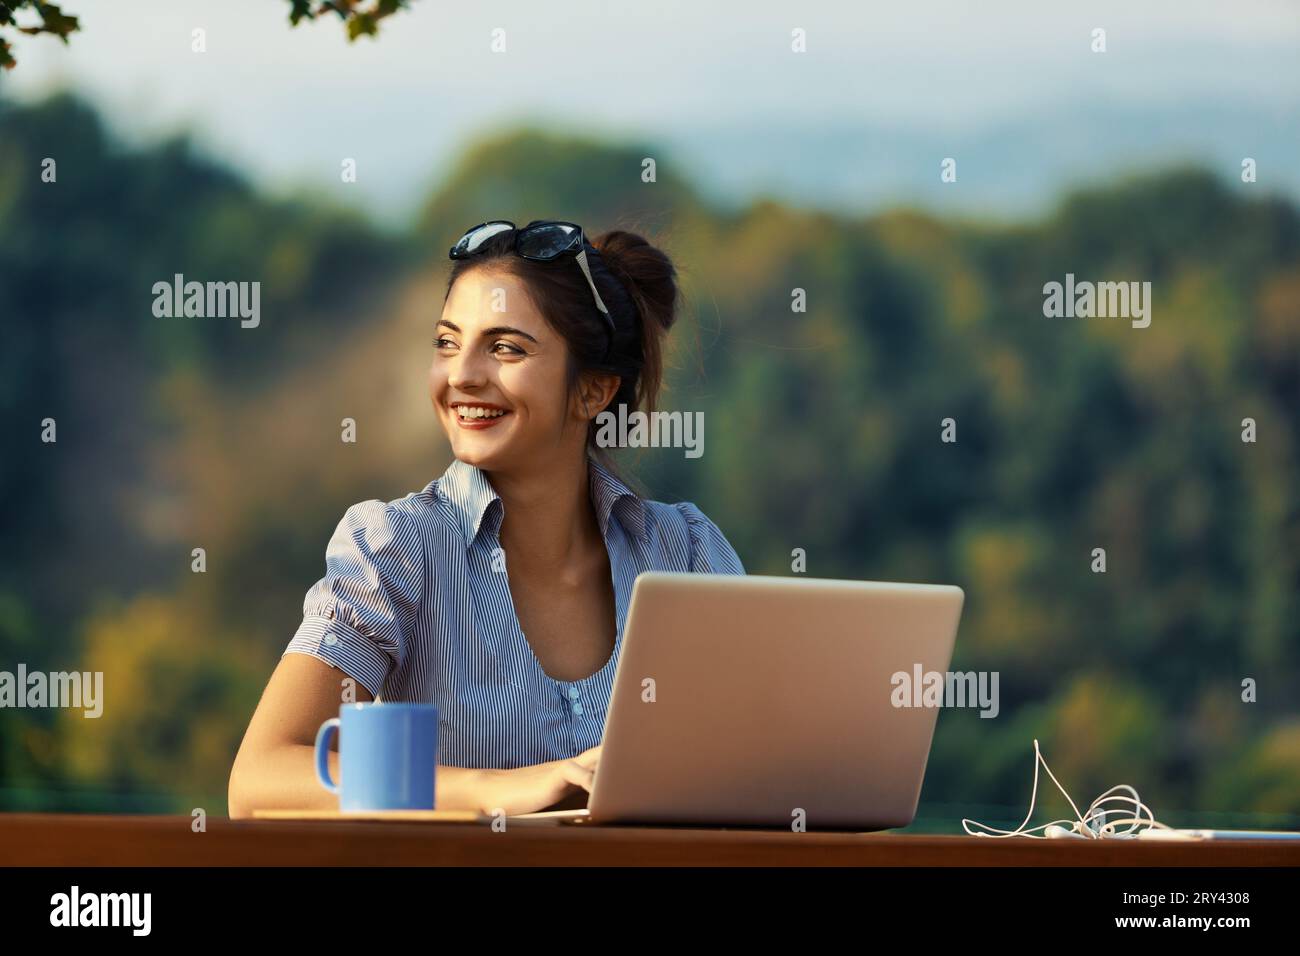 Woman with tied hair, using glasses as a hairband, works outdoors with her laptop, amidst greenery and mountains Stock Photo